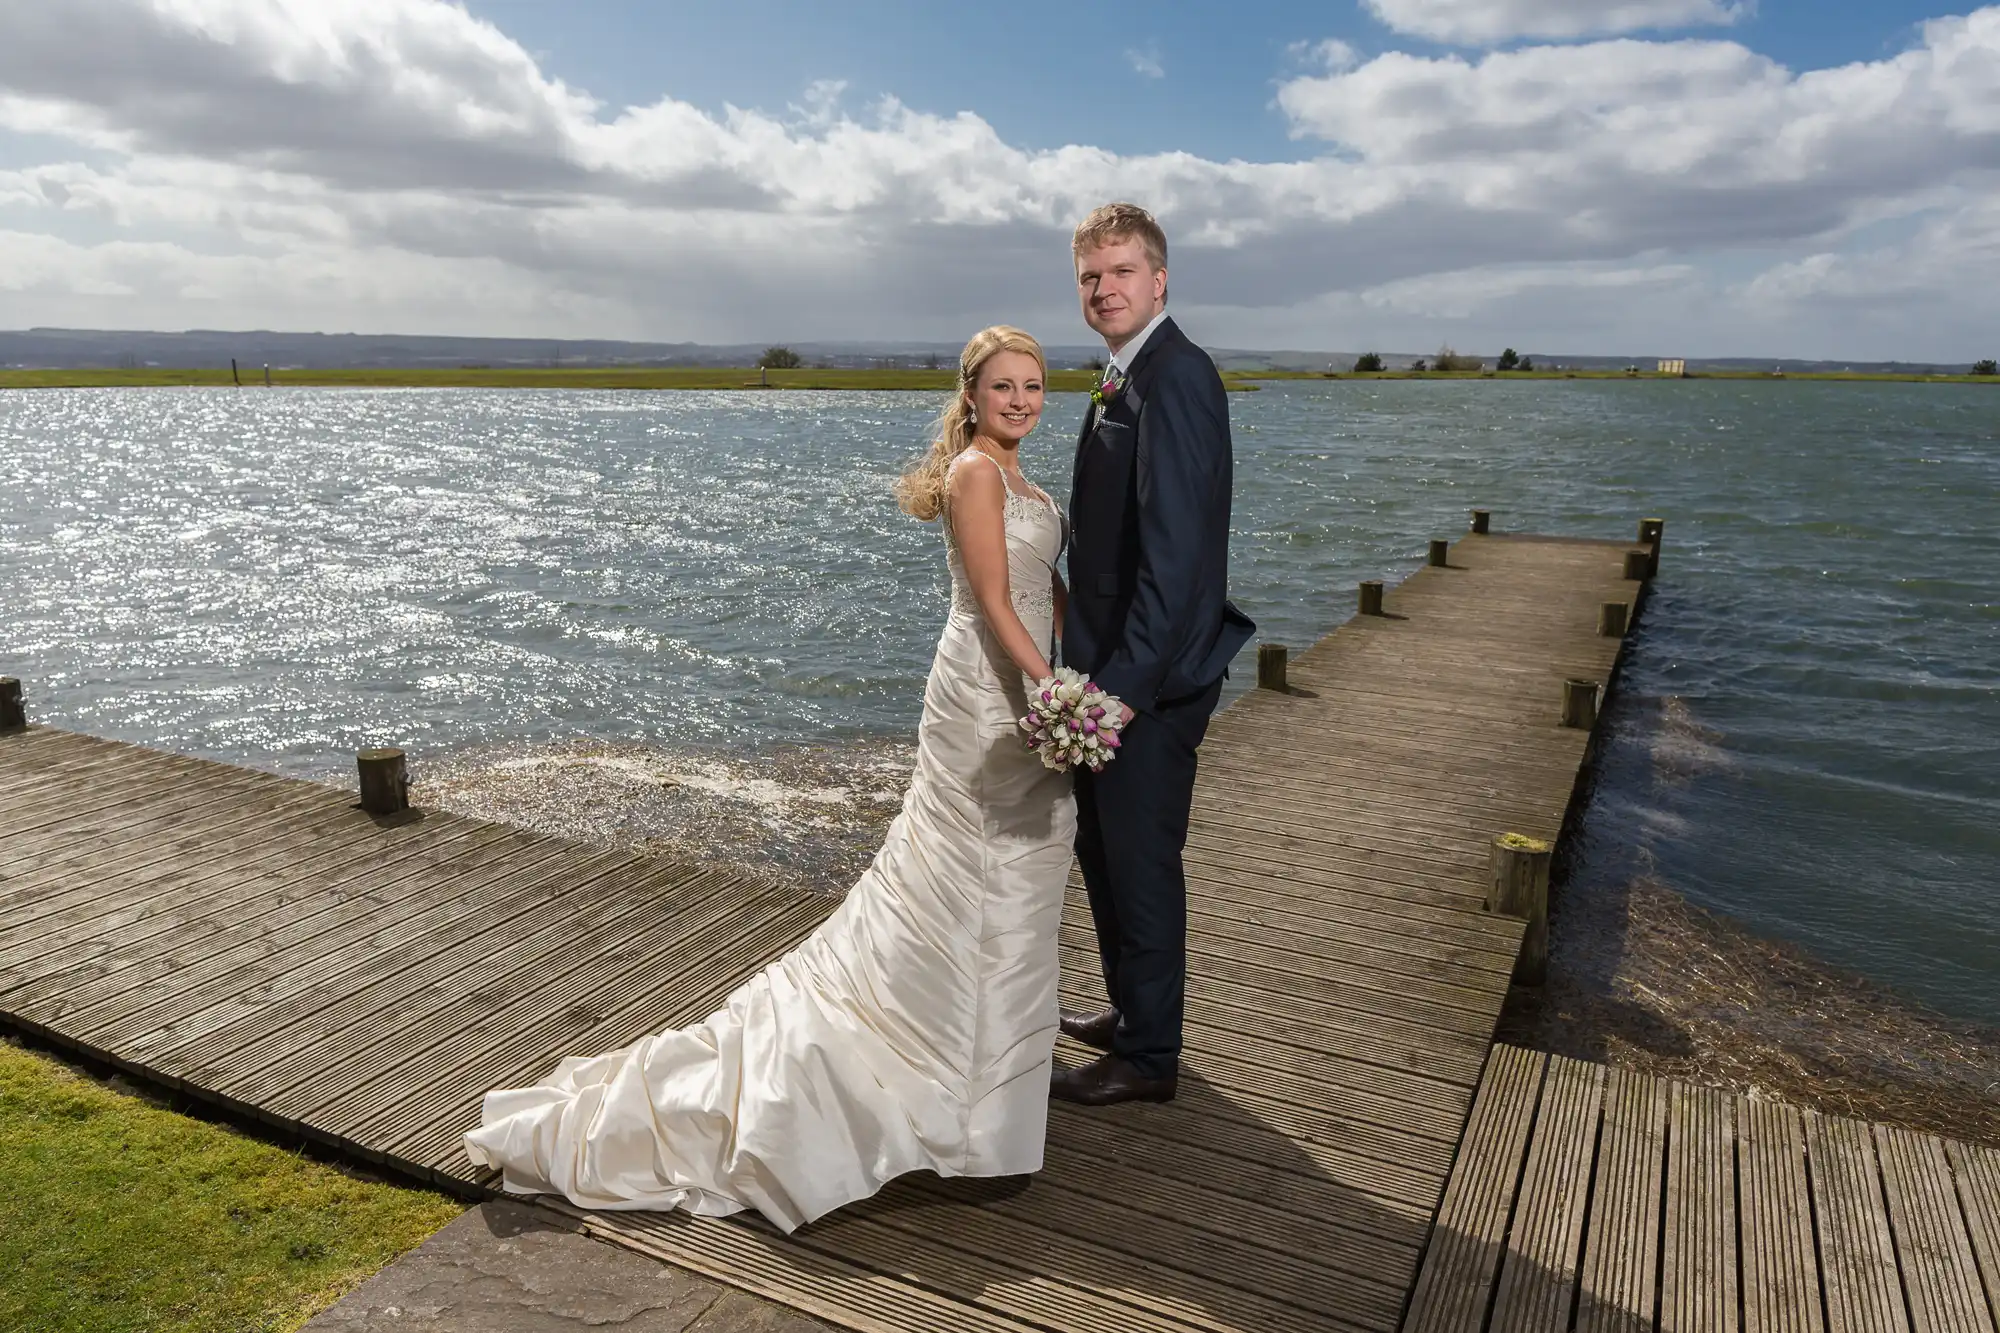 The Vu wedding photographer - newlyweds Nicola and Andrew during their photoshoot